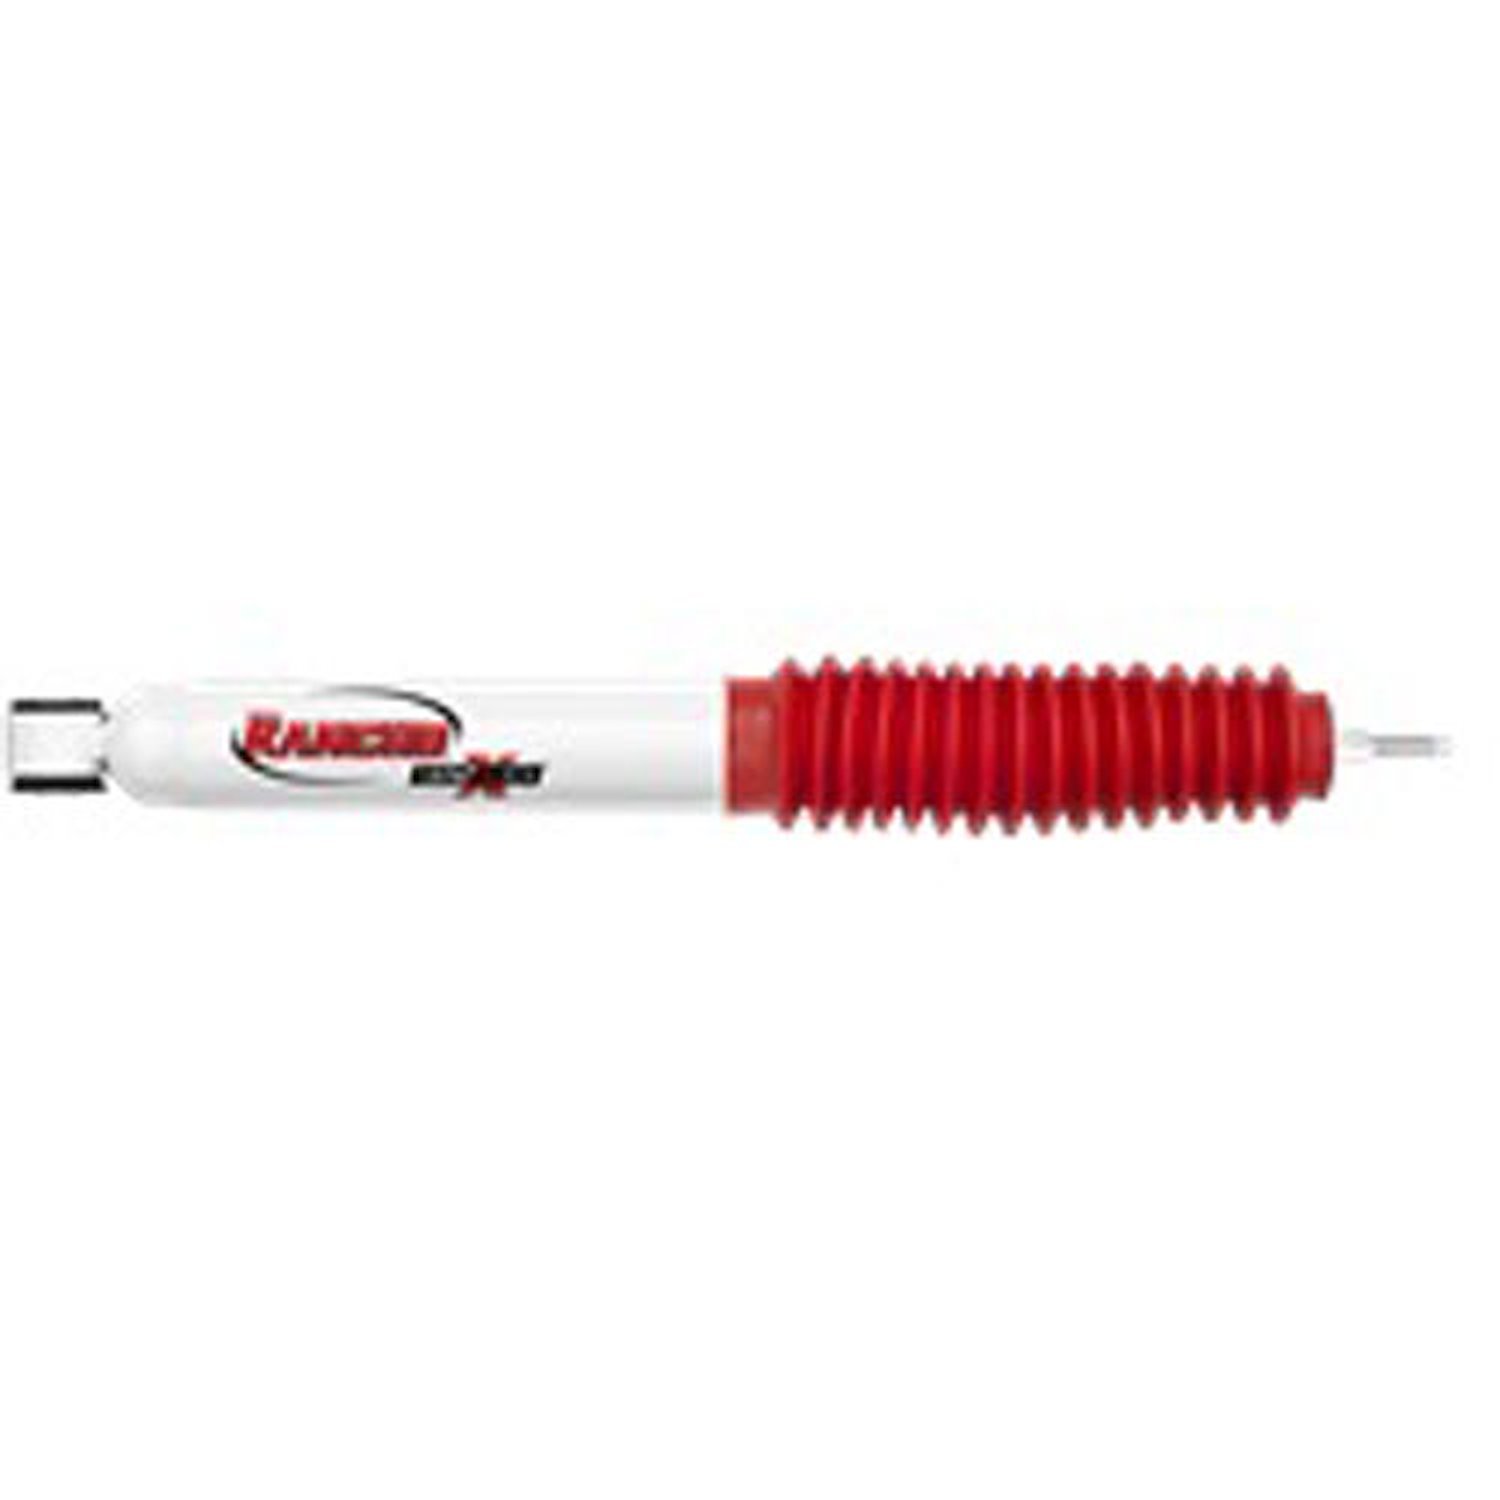 RS5000X Front Shock Absorber Fits GM Fullsize 1500 Pickups and SUVs